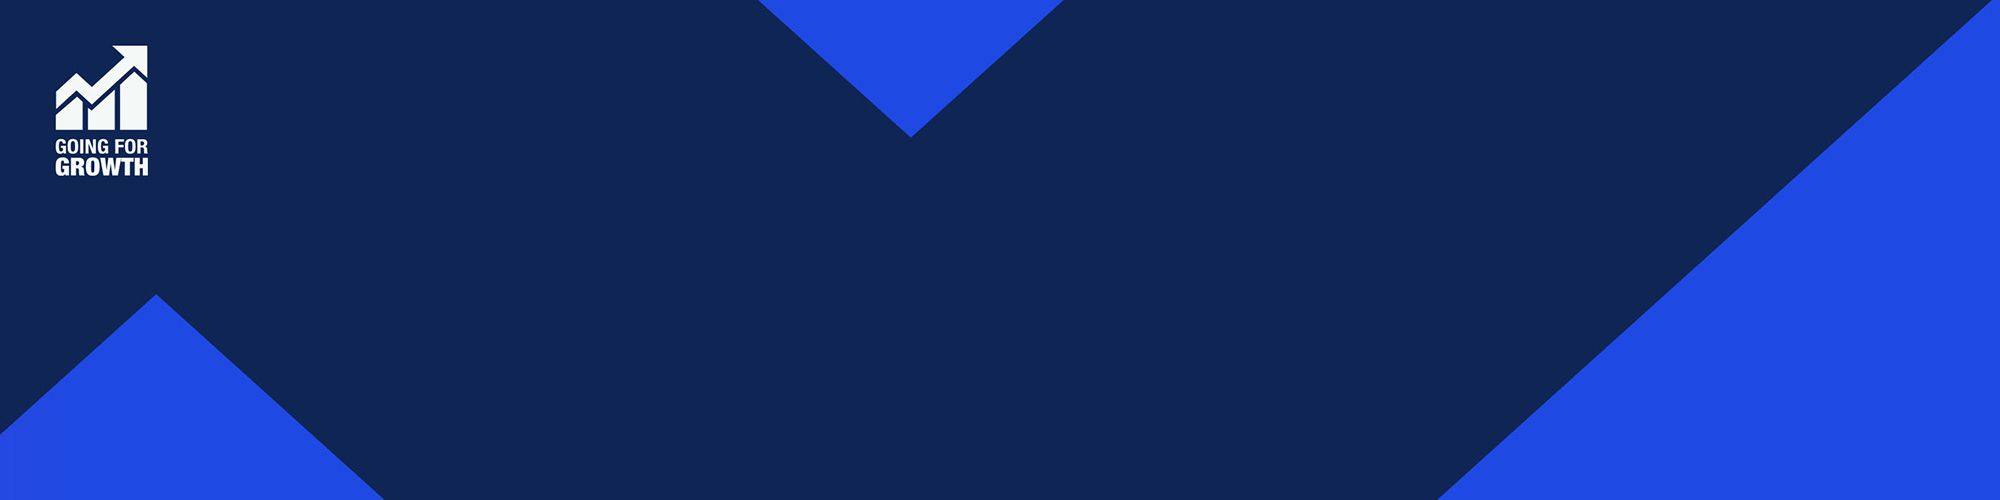 Going for growth banner - blue shapes on navy background with logo on top left